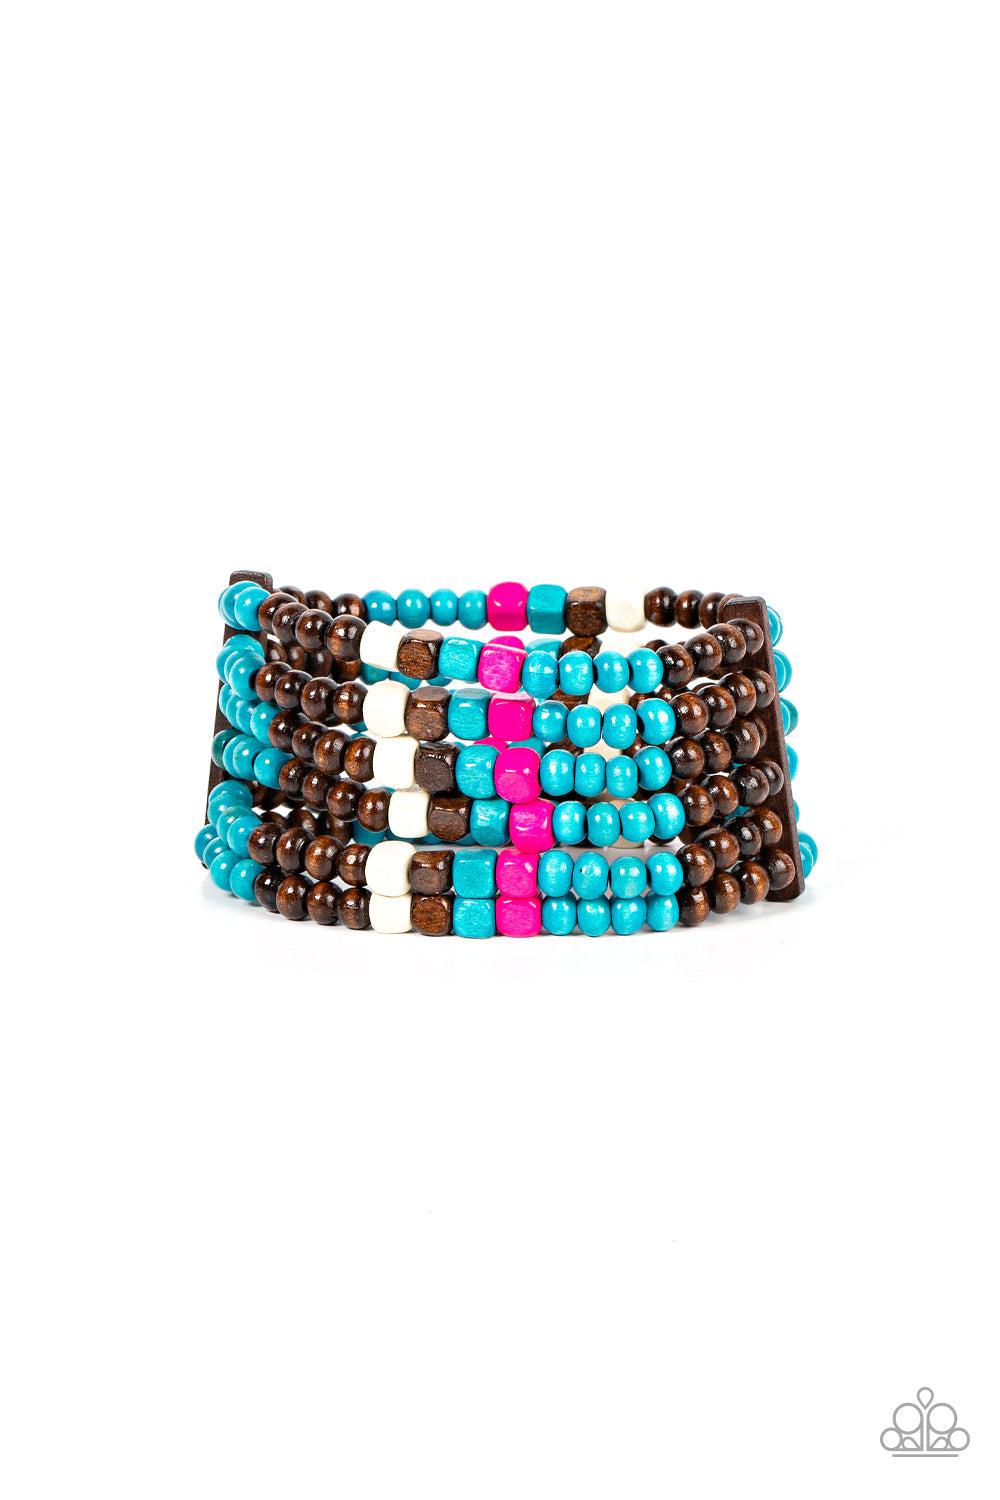 Dive into Maldives Turquoise Blue Wood Bracelet - Paparazzi Accessories- lightbox - CarasShop.com - $5 Jewelry by Cara Jewels